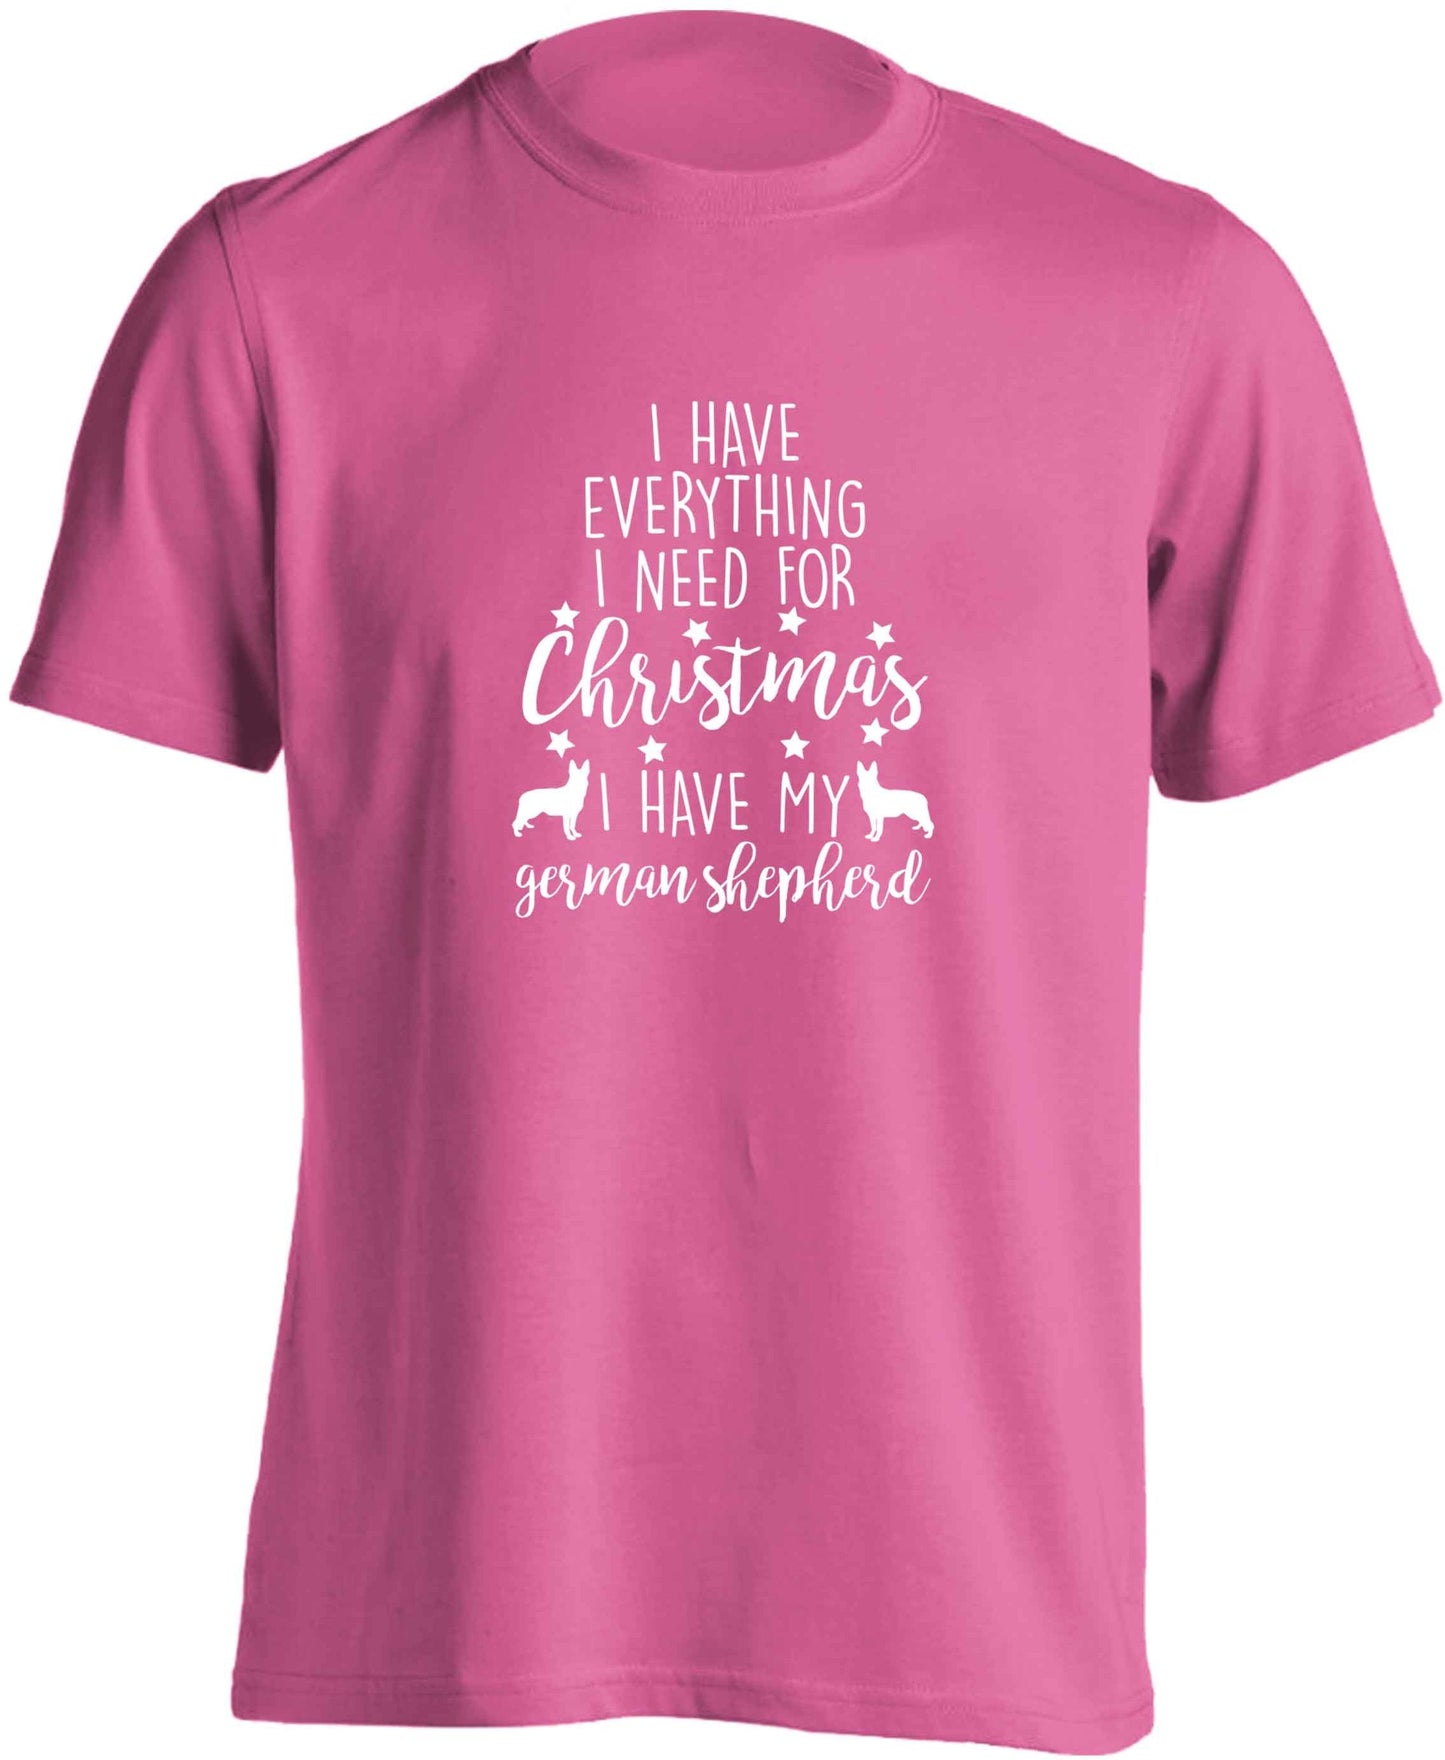 I have everything I need for Christmas I have my german shepherd adults unisex pink Tshirt 2XL